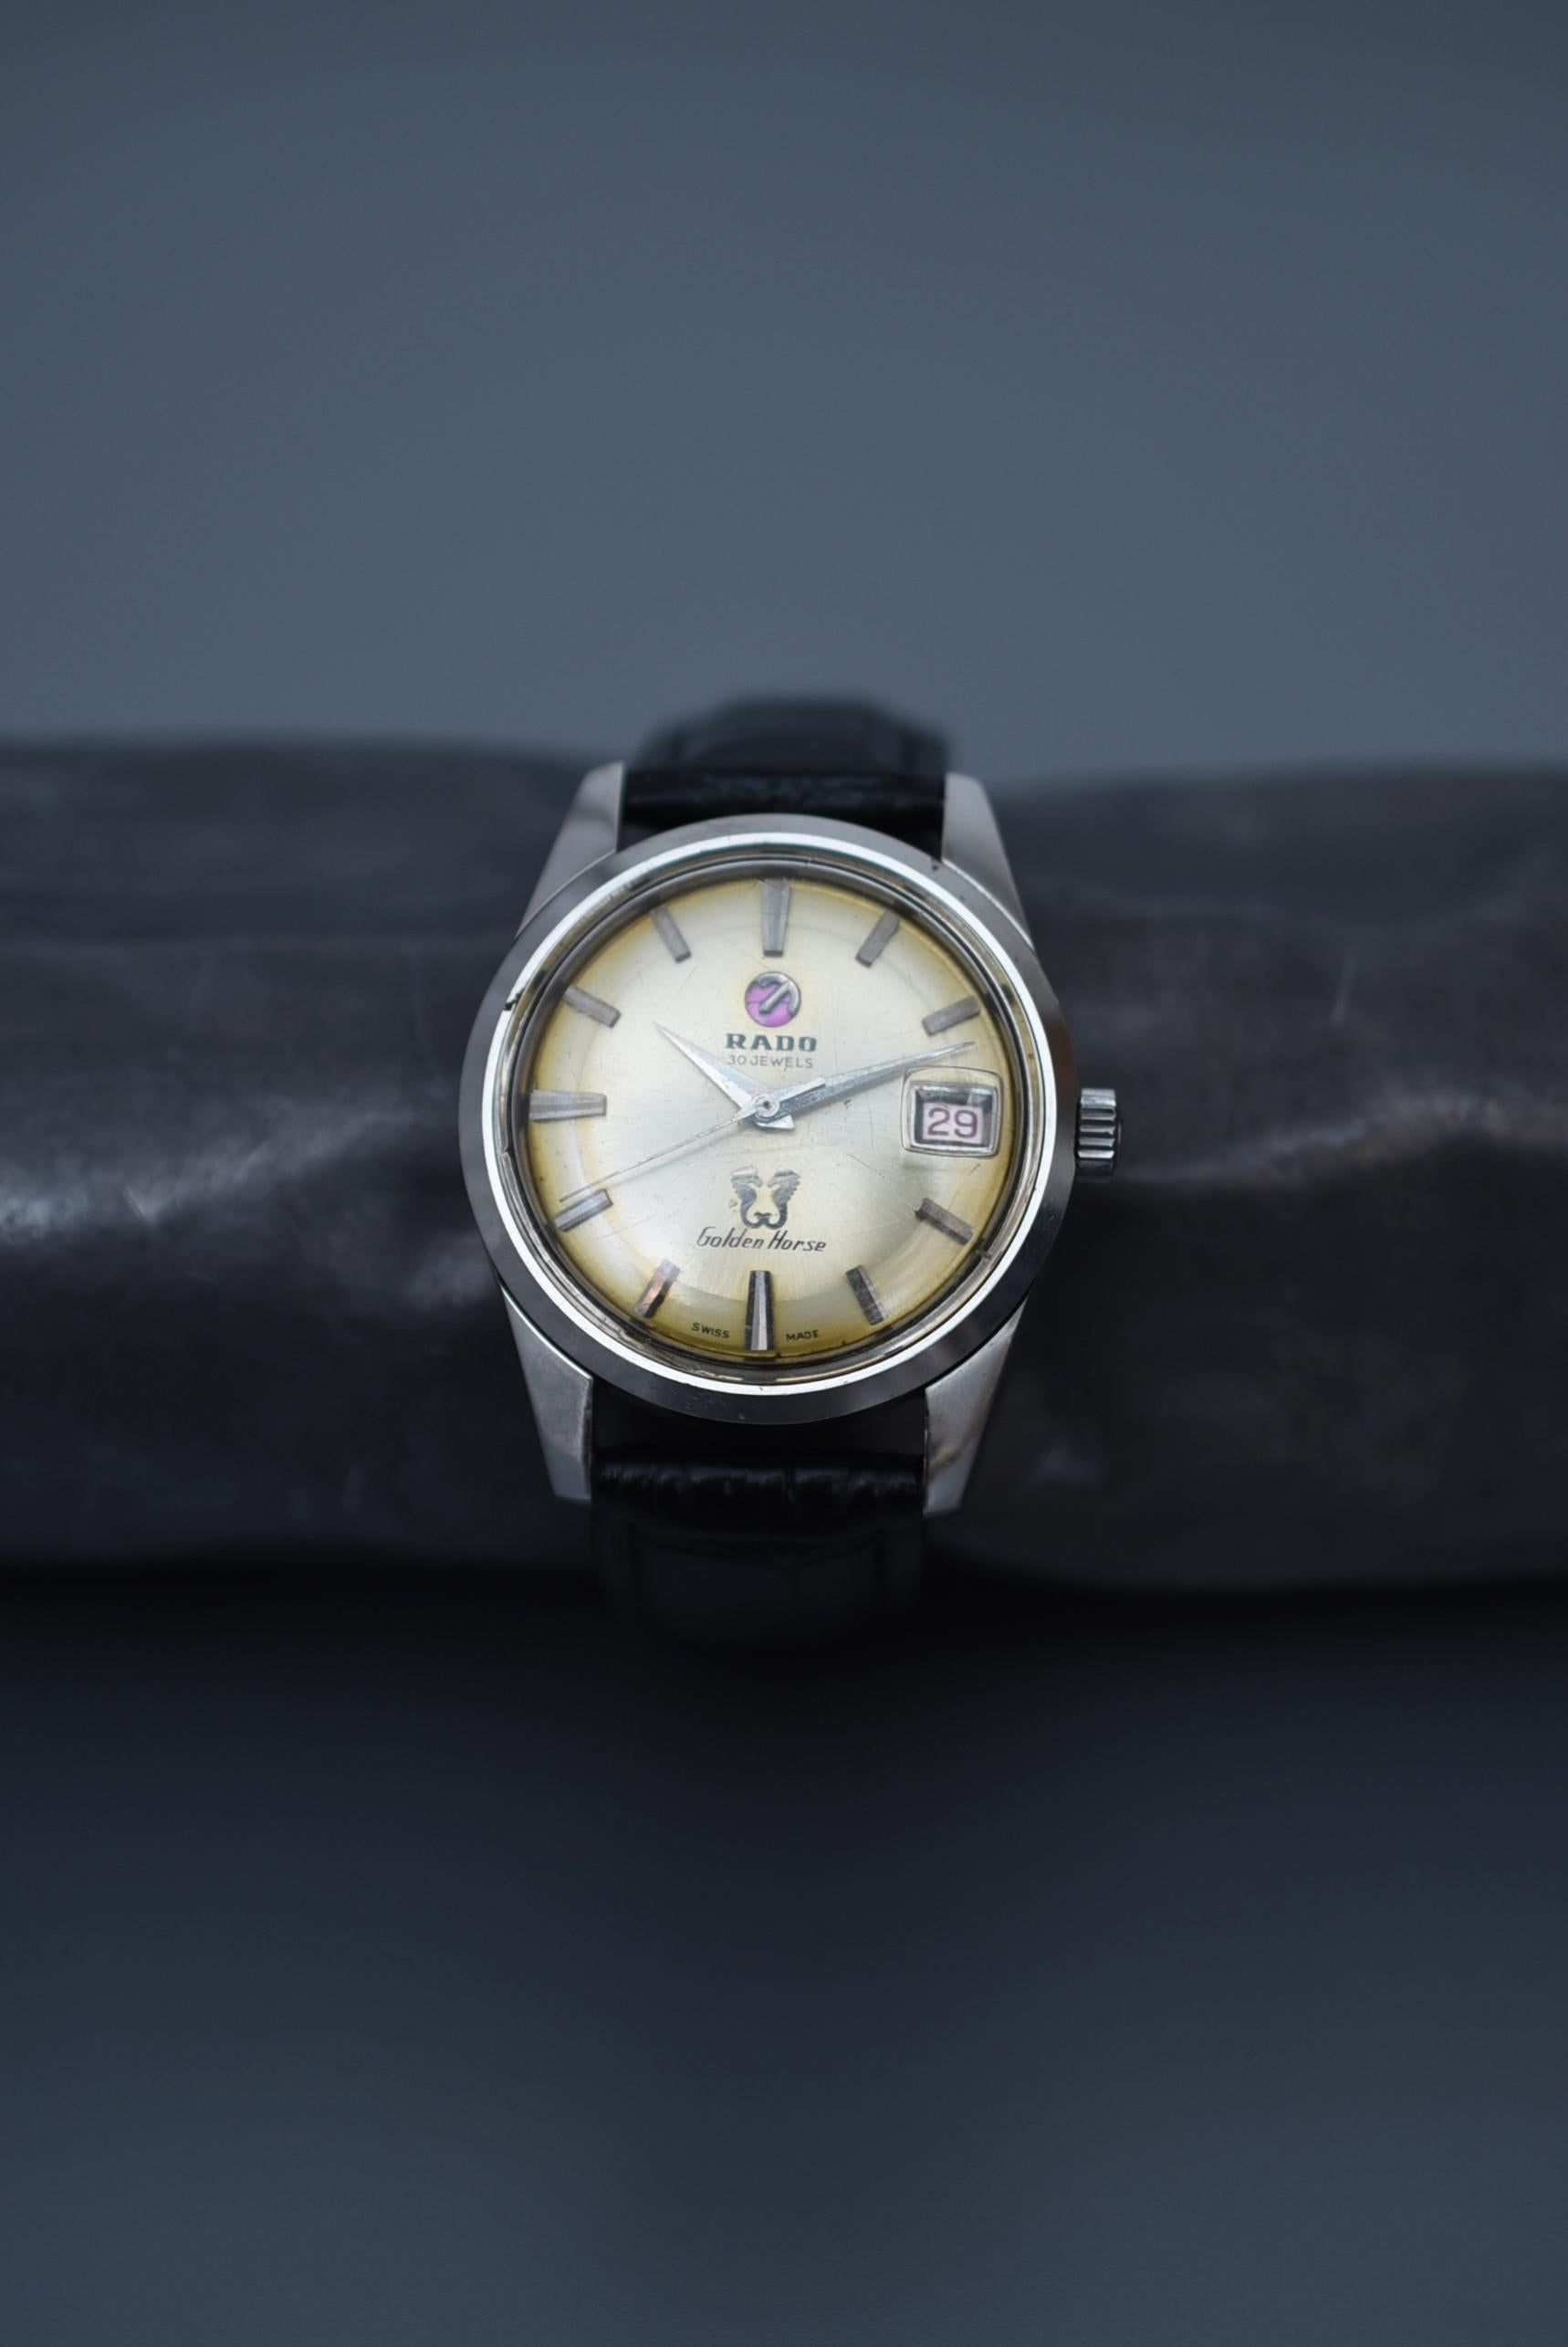 RADO  Golden Horse  / 1970s Vintage watch 

size : case 3.4cm
arm circumference : 17cm between 21cm
No. 31123837

movement : Hand-wound   automatic

This is 